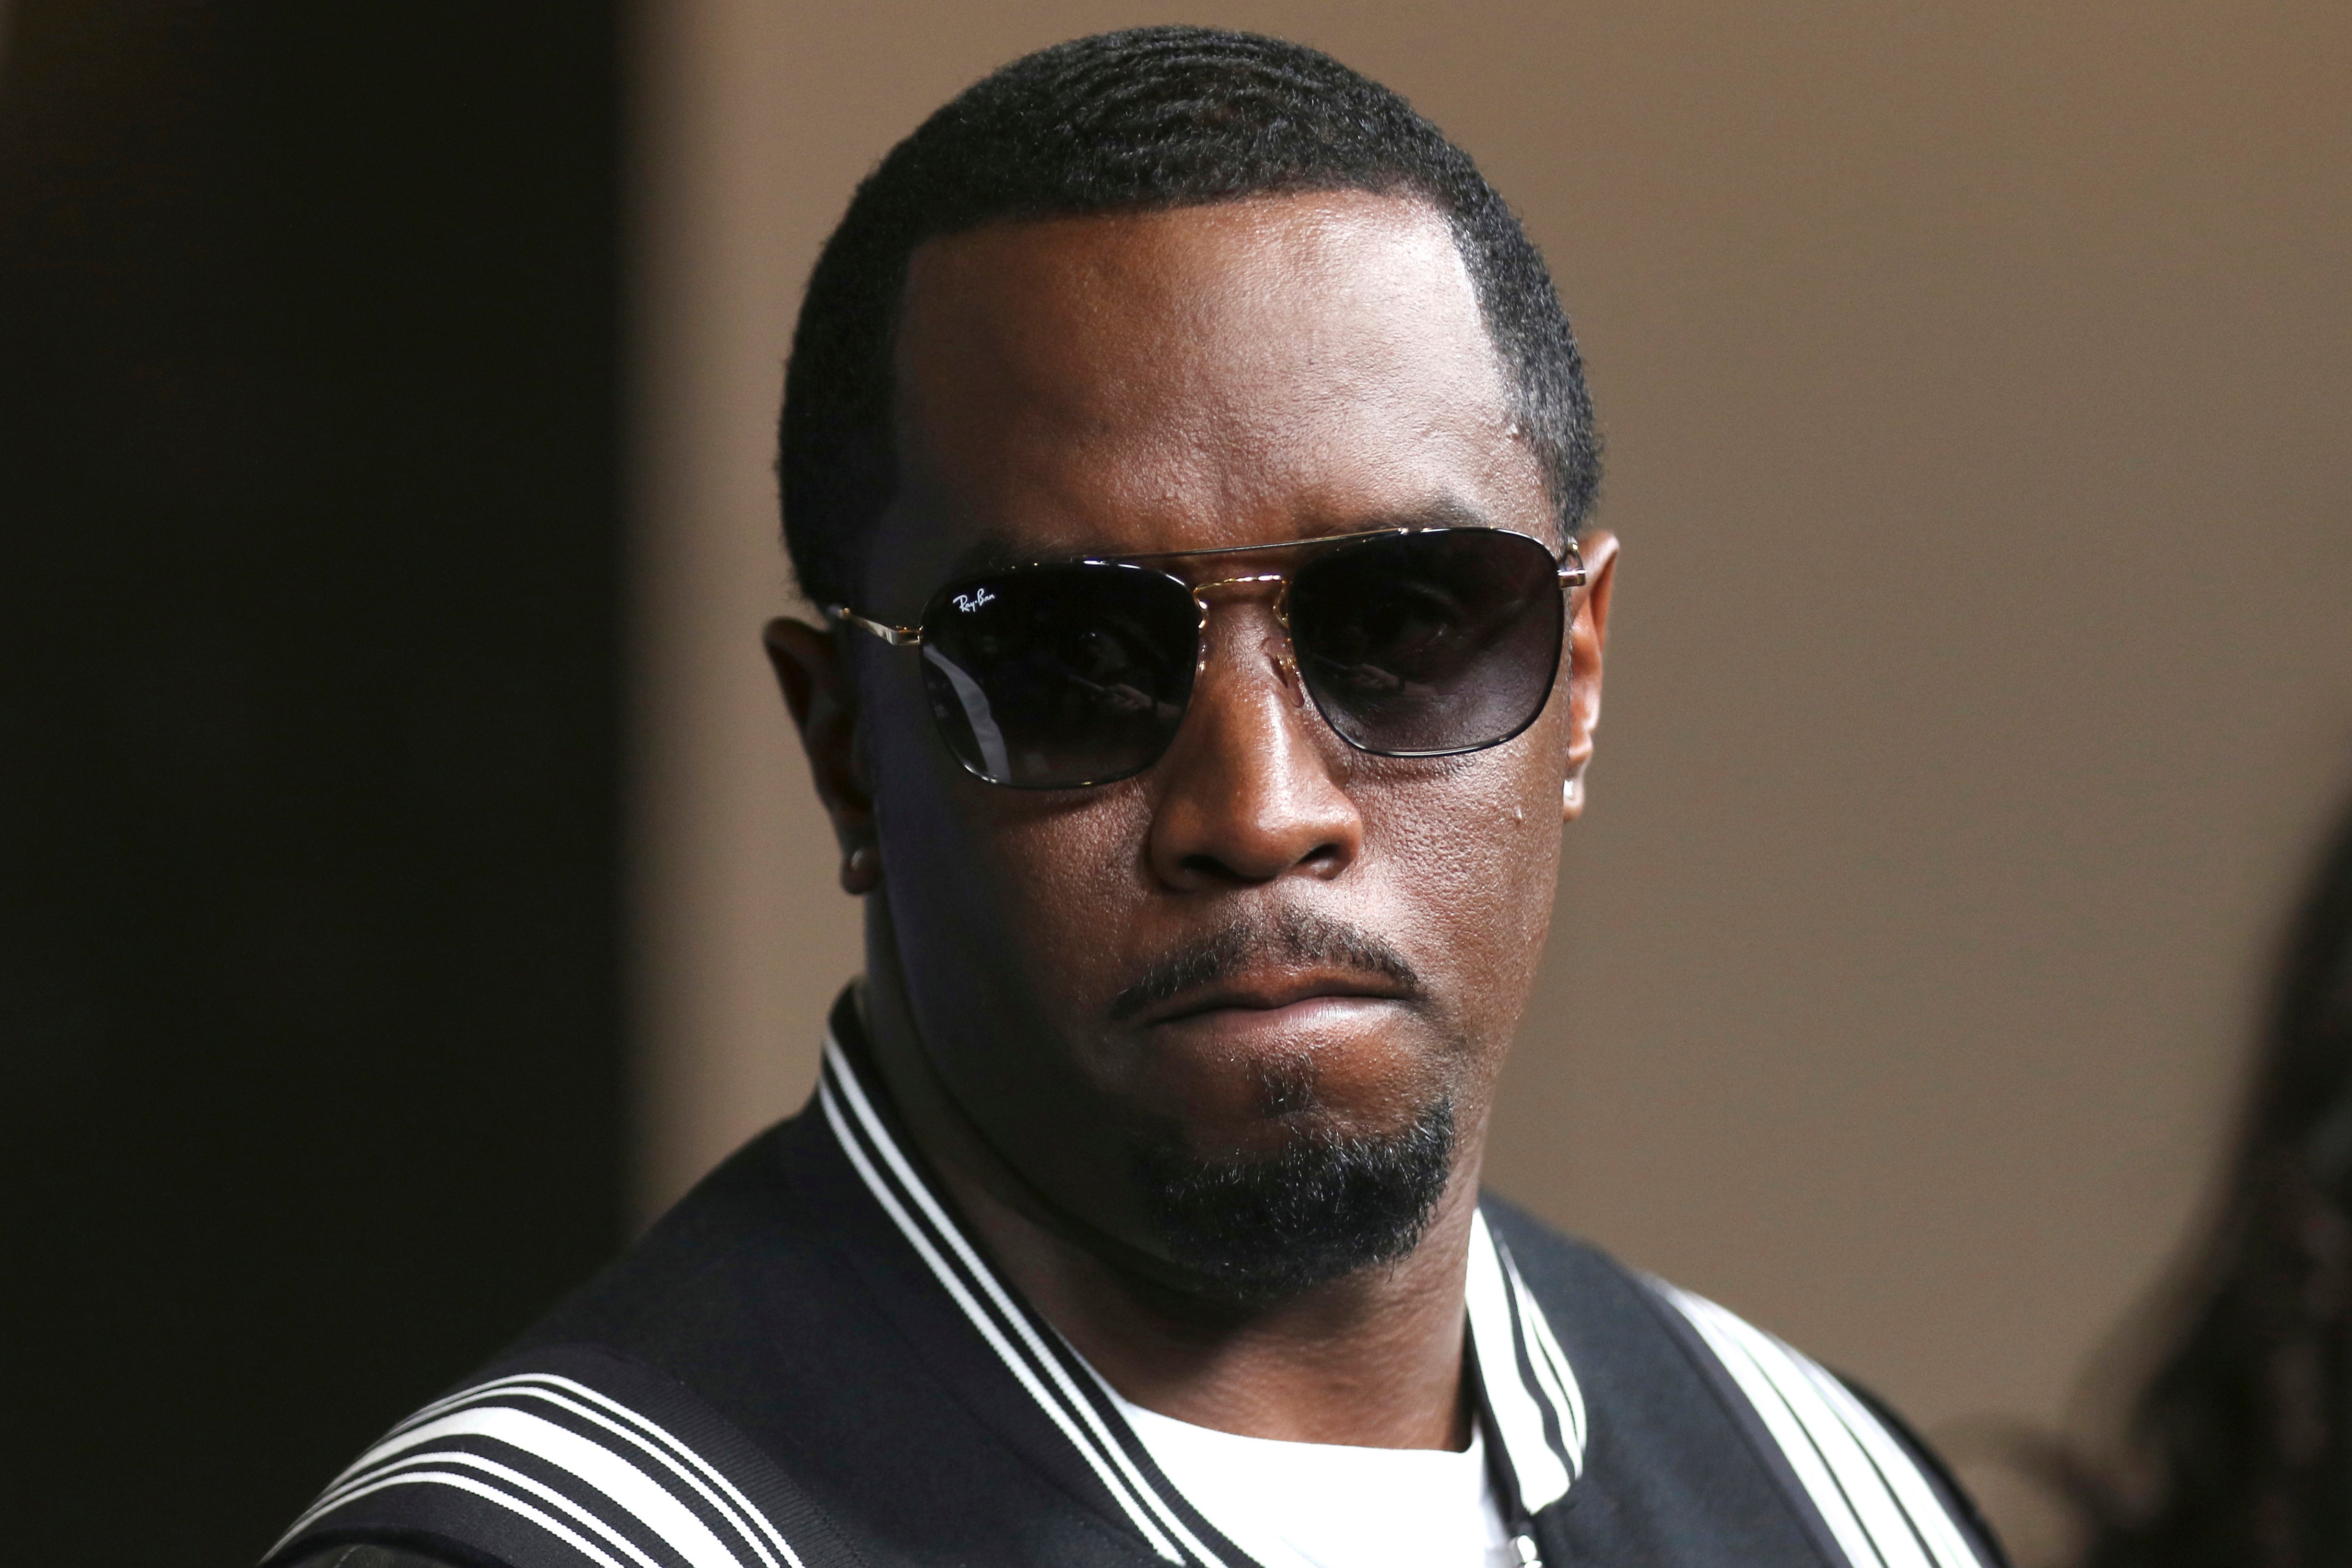 Sean ‘Diddy’ Combs, 54, has strongly denied all the accusations against him